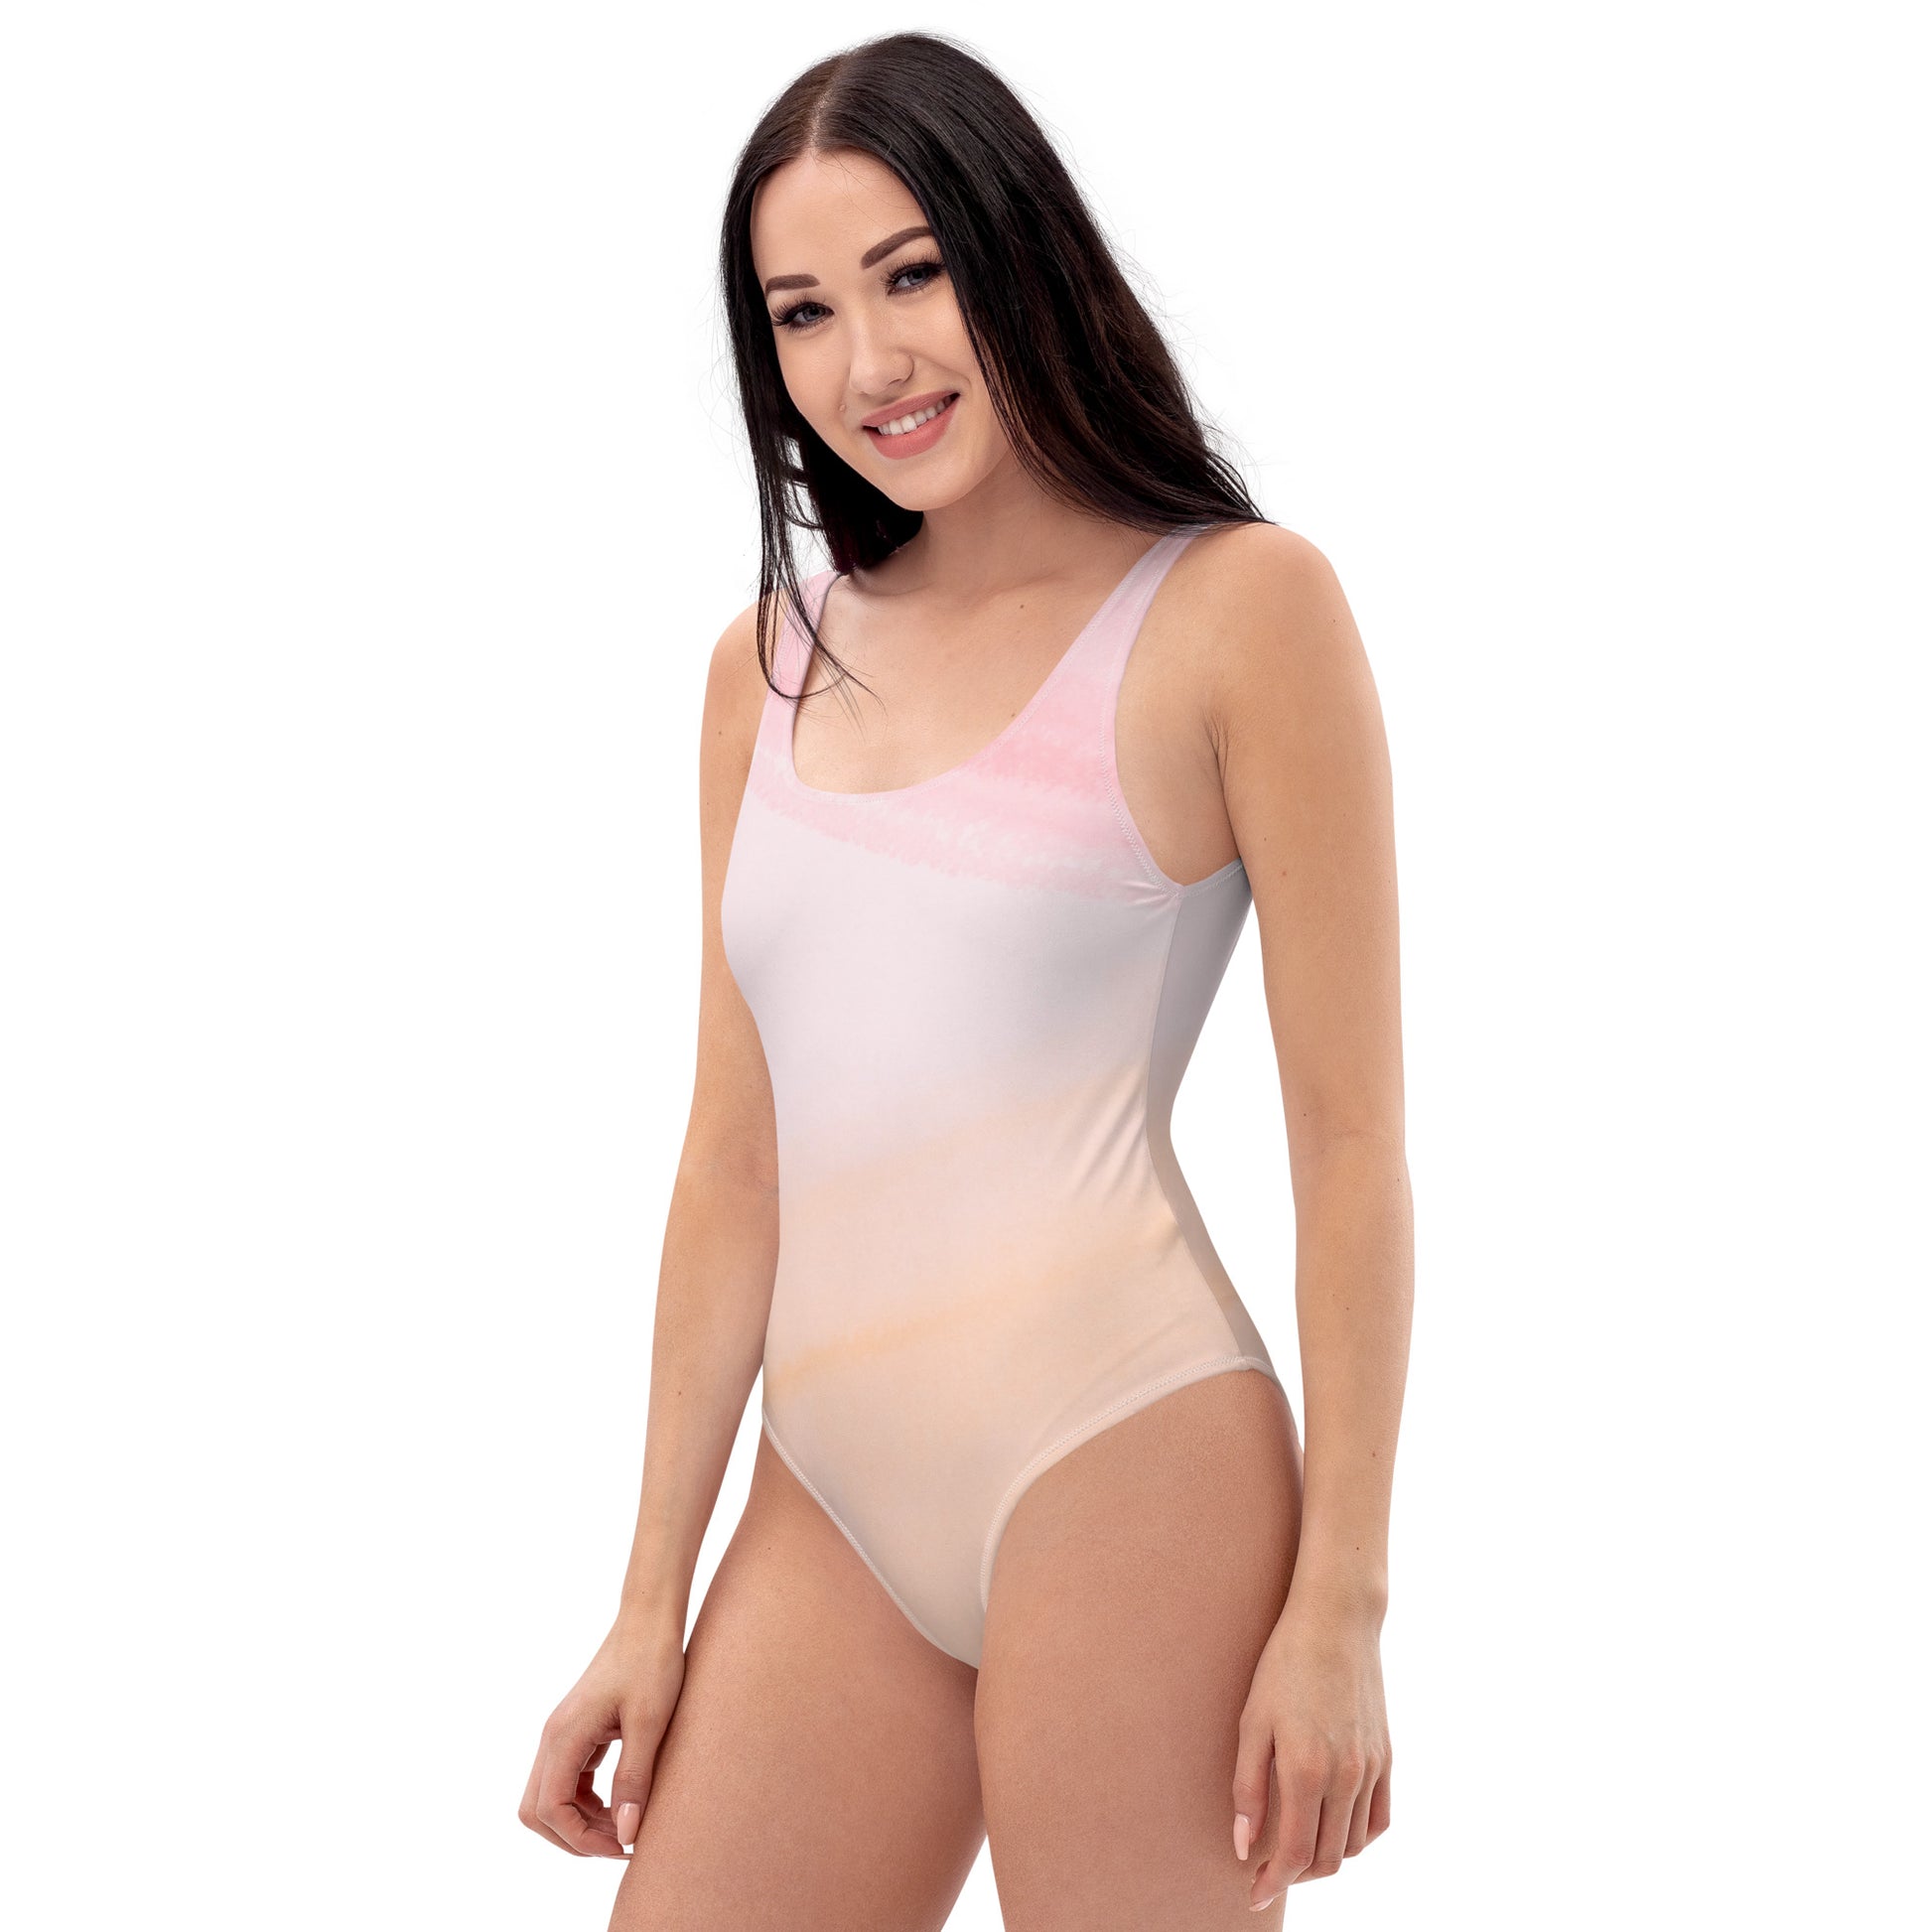 Cotton Candy Blush: Sweet Serenade Pink Color One-Piece Swimsuit 